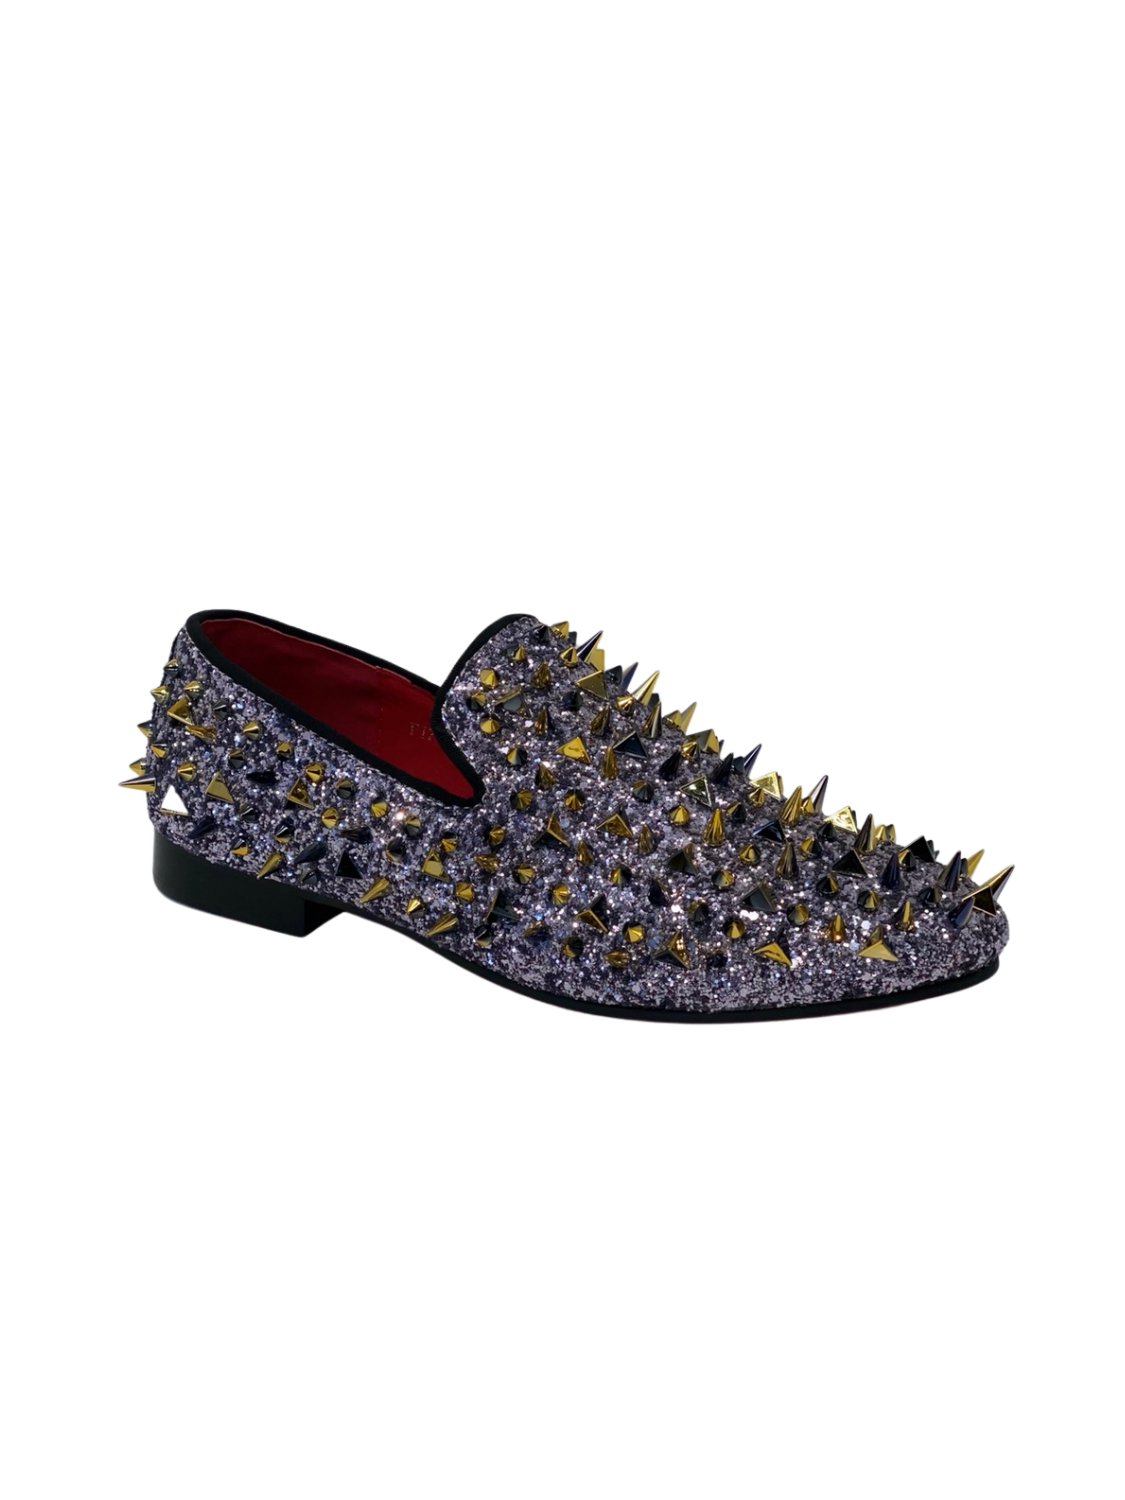 Fiesso Gunmetal Loafer with Gold Spikes